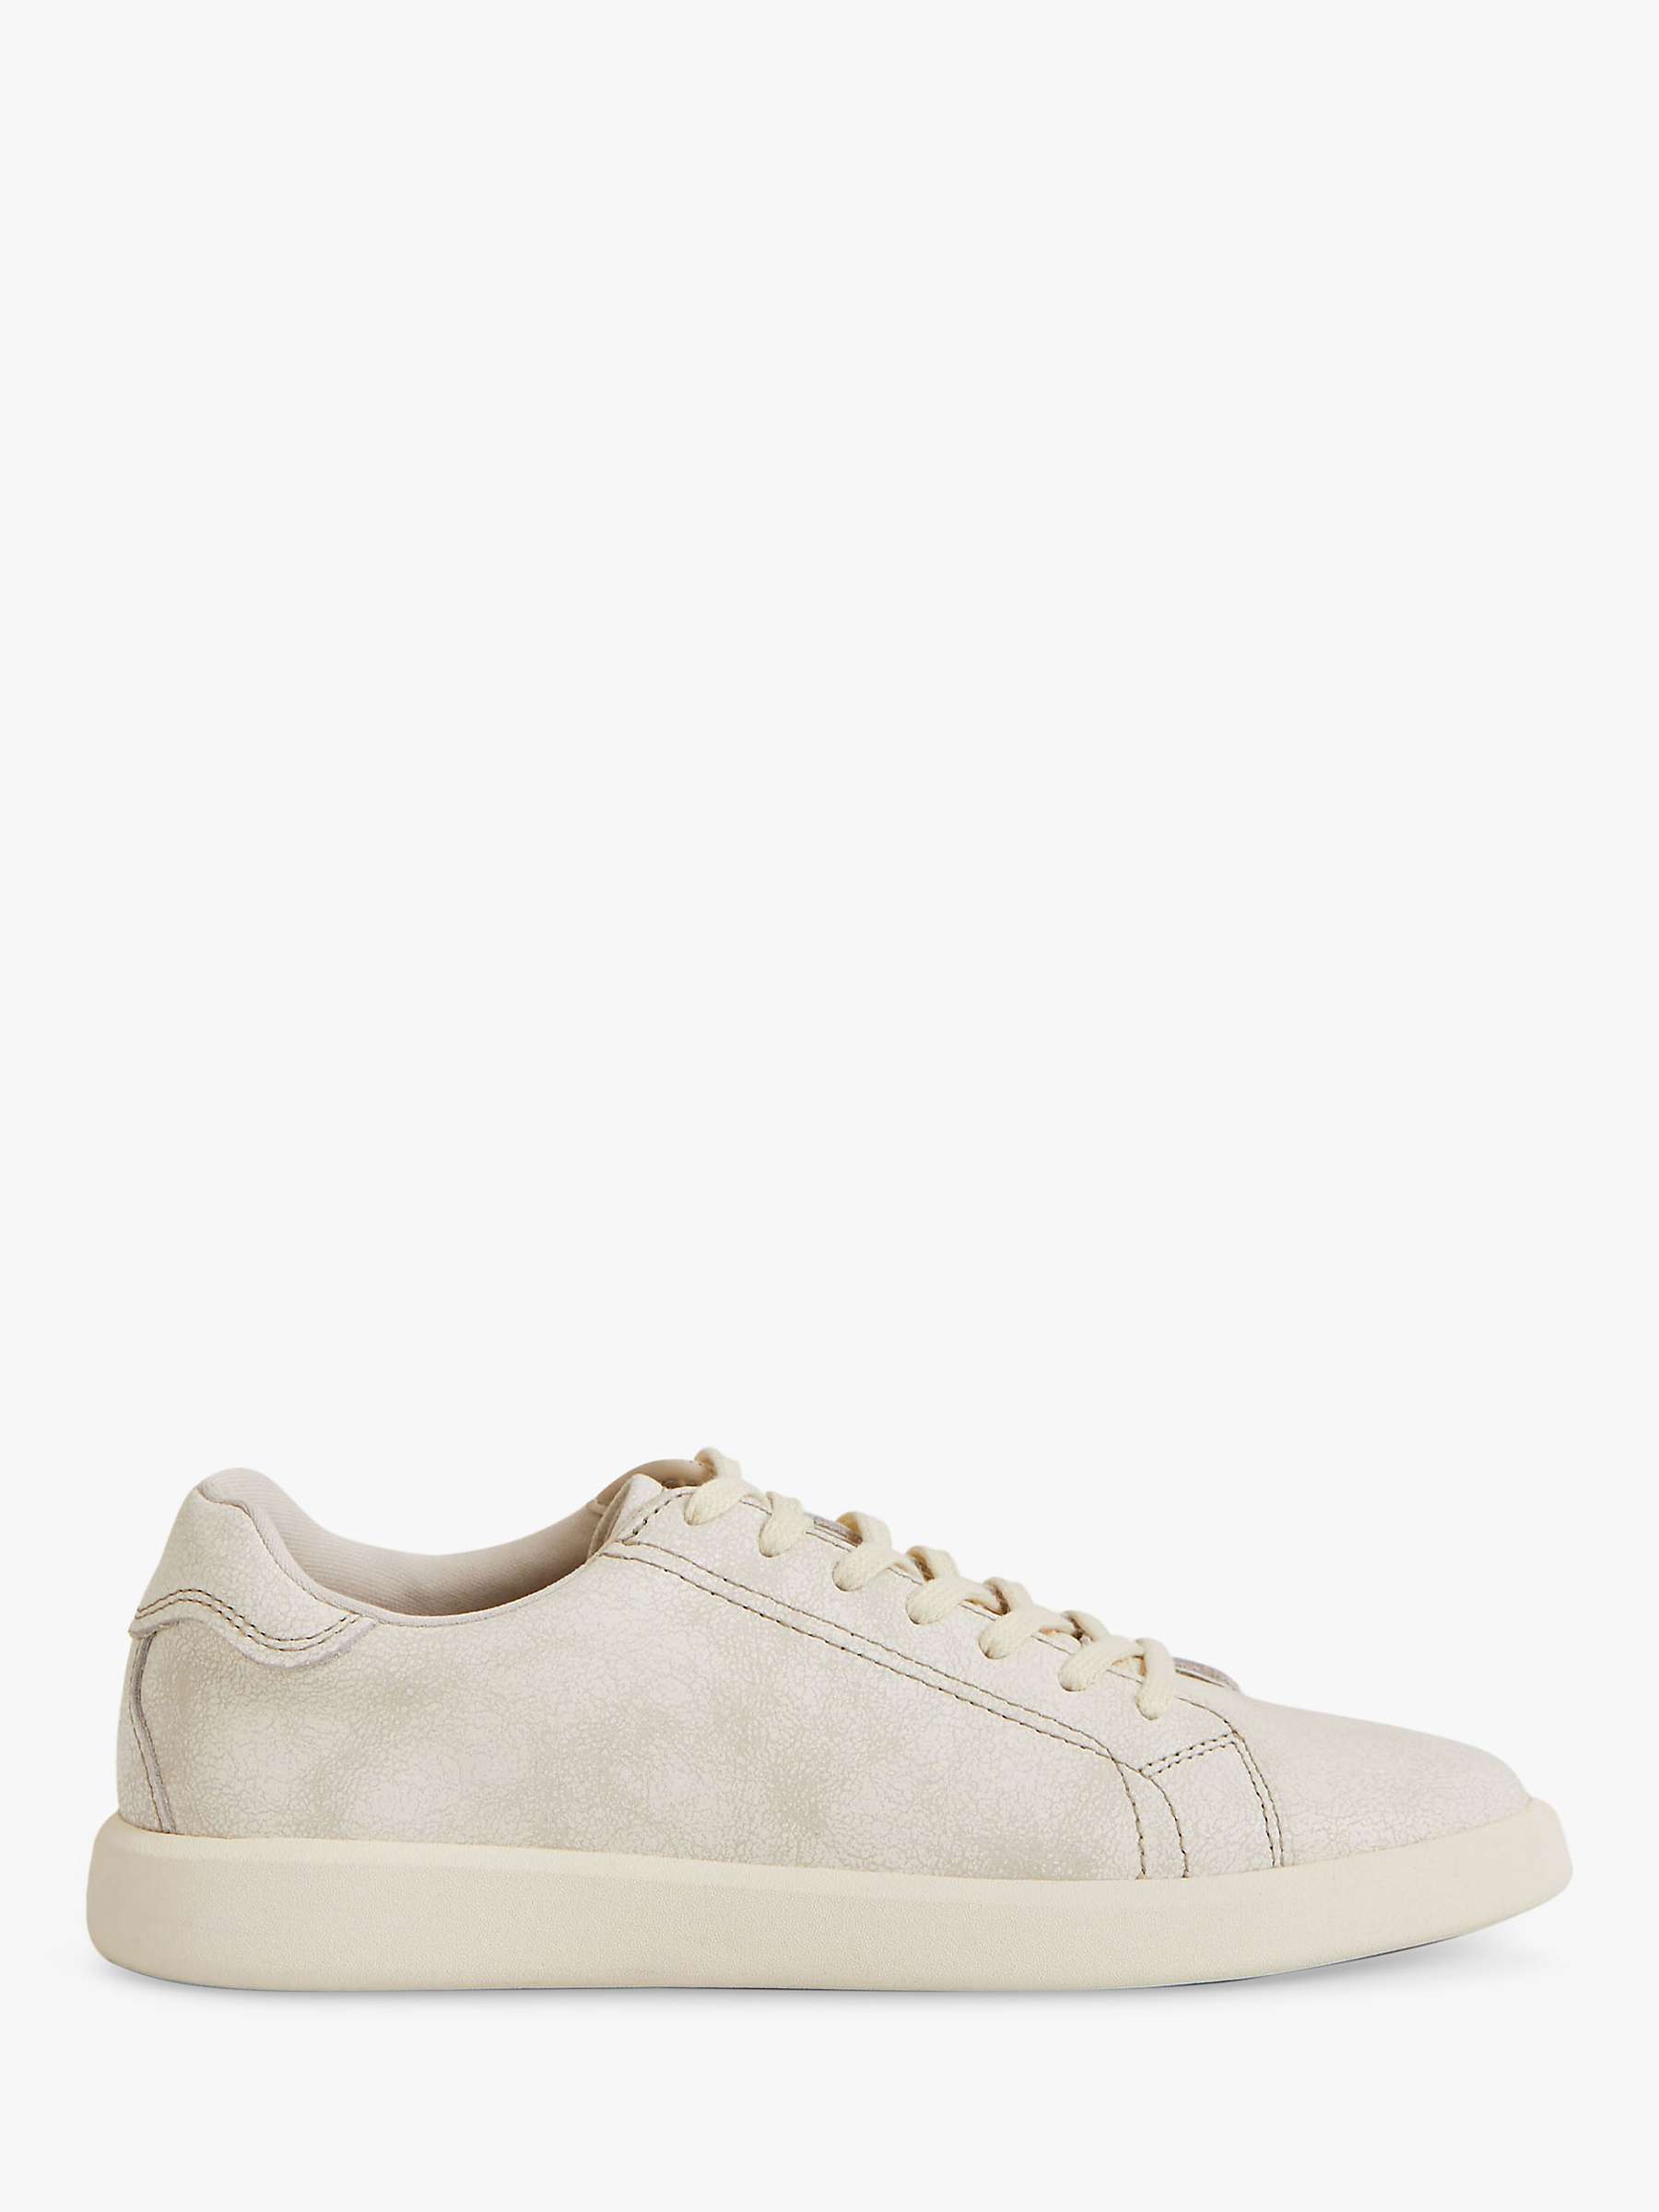 Buy Vagabond Shoemakers Maya Leather Trainers, Vintage Off White Online at johnlewis.com